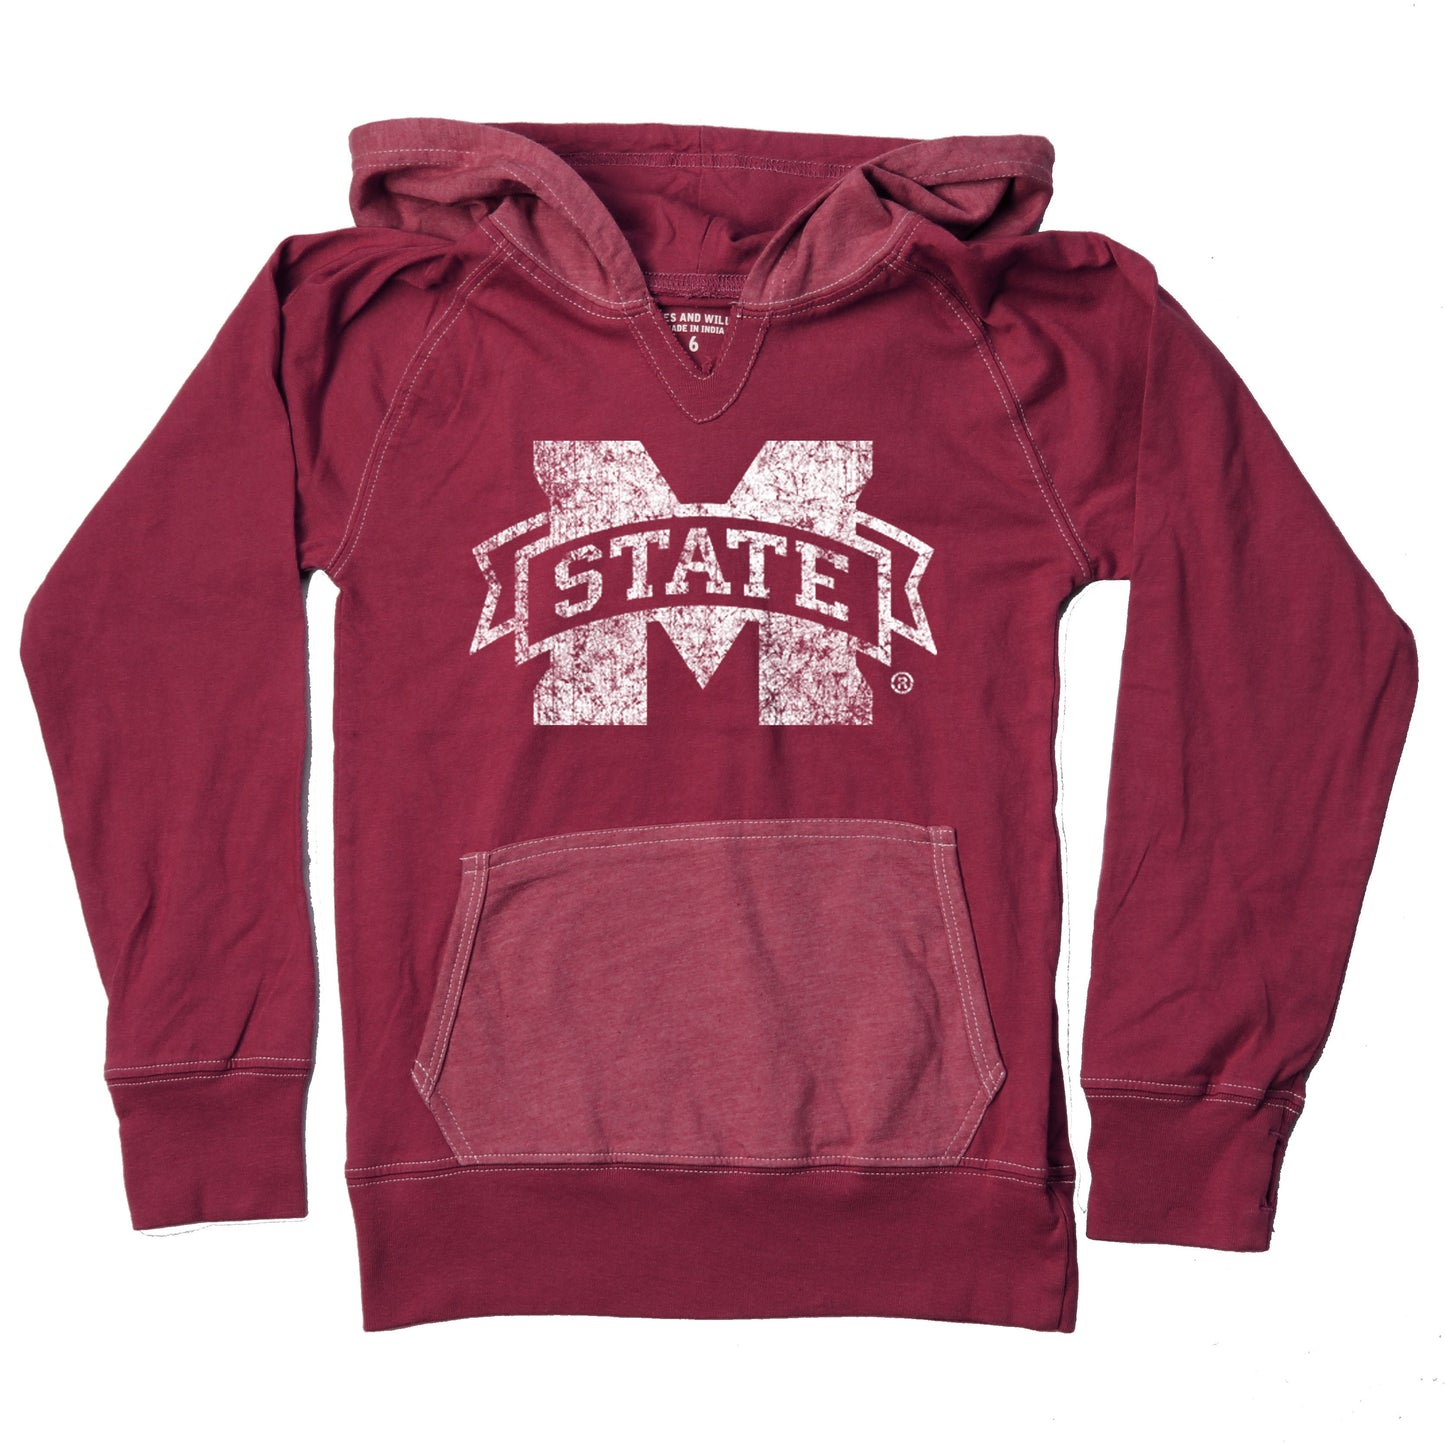 Mississippi State Bulldogs Youth Girls Colorblock Hoodie